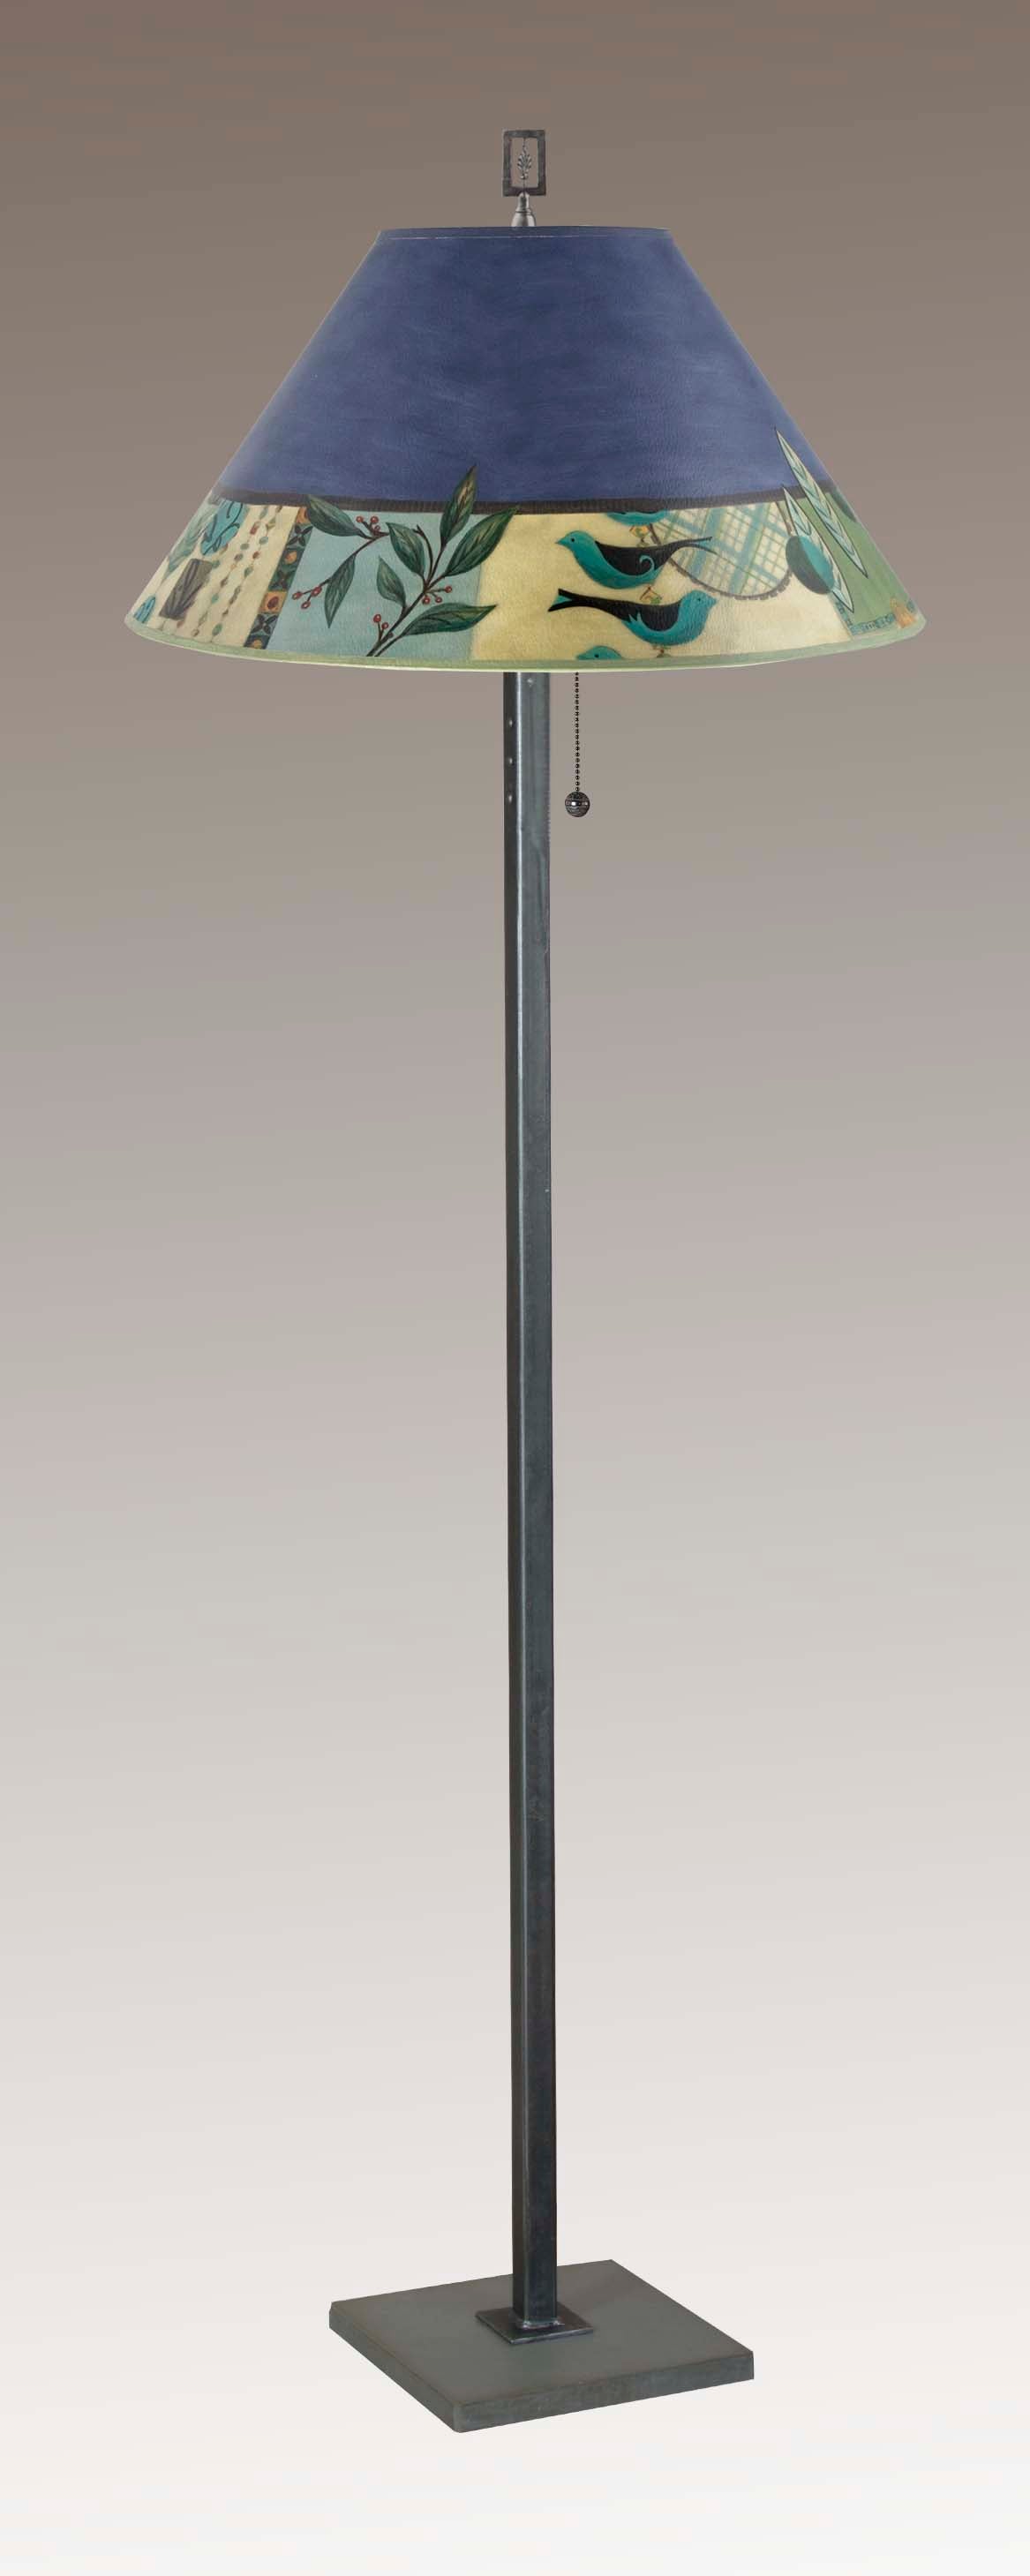 Steel Floor Lamp with Large Conical Shade in New Capri Periwinkle